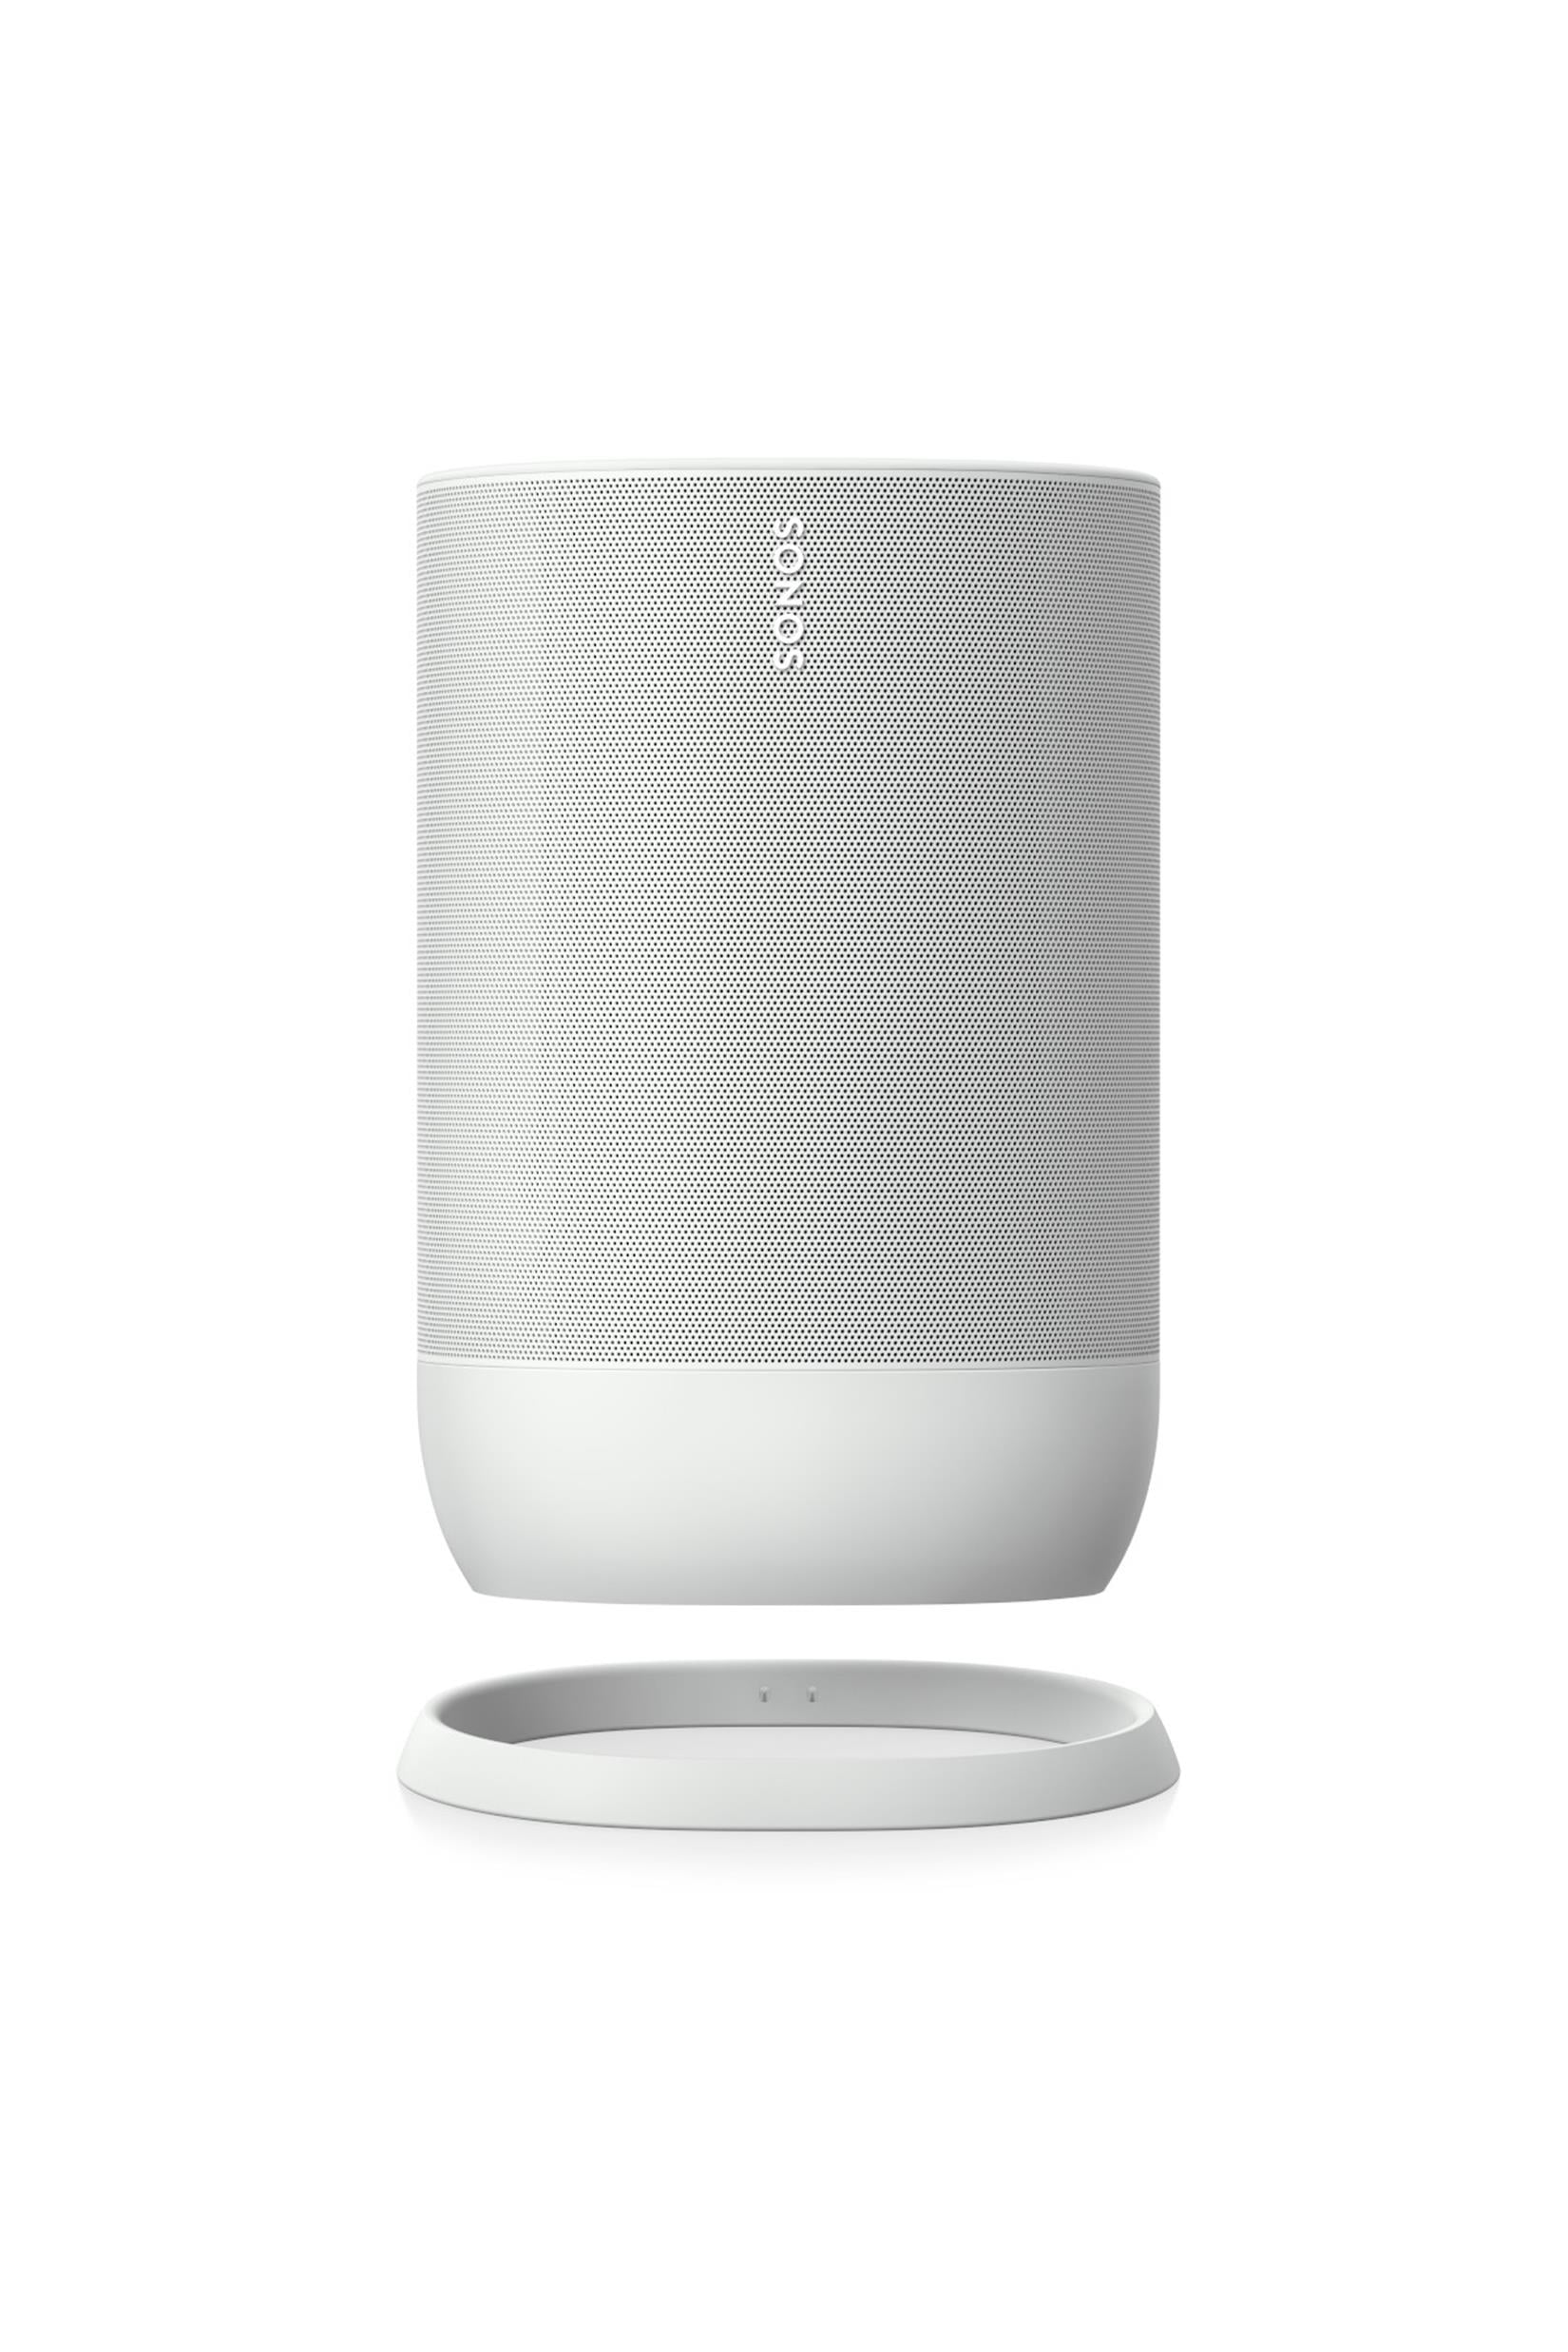 Sonos Move Portable Smart Battery-Powered Speaker with Bluetooth and (White) - Walmart.com